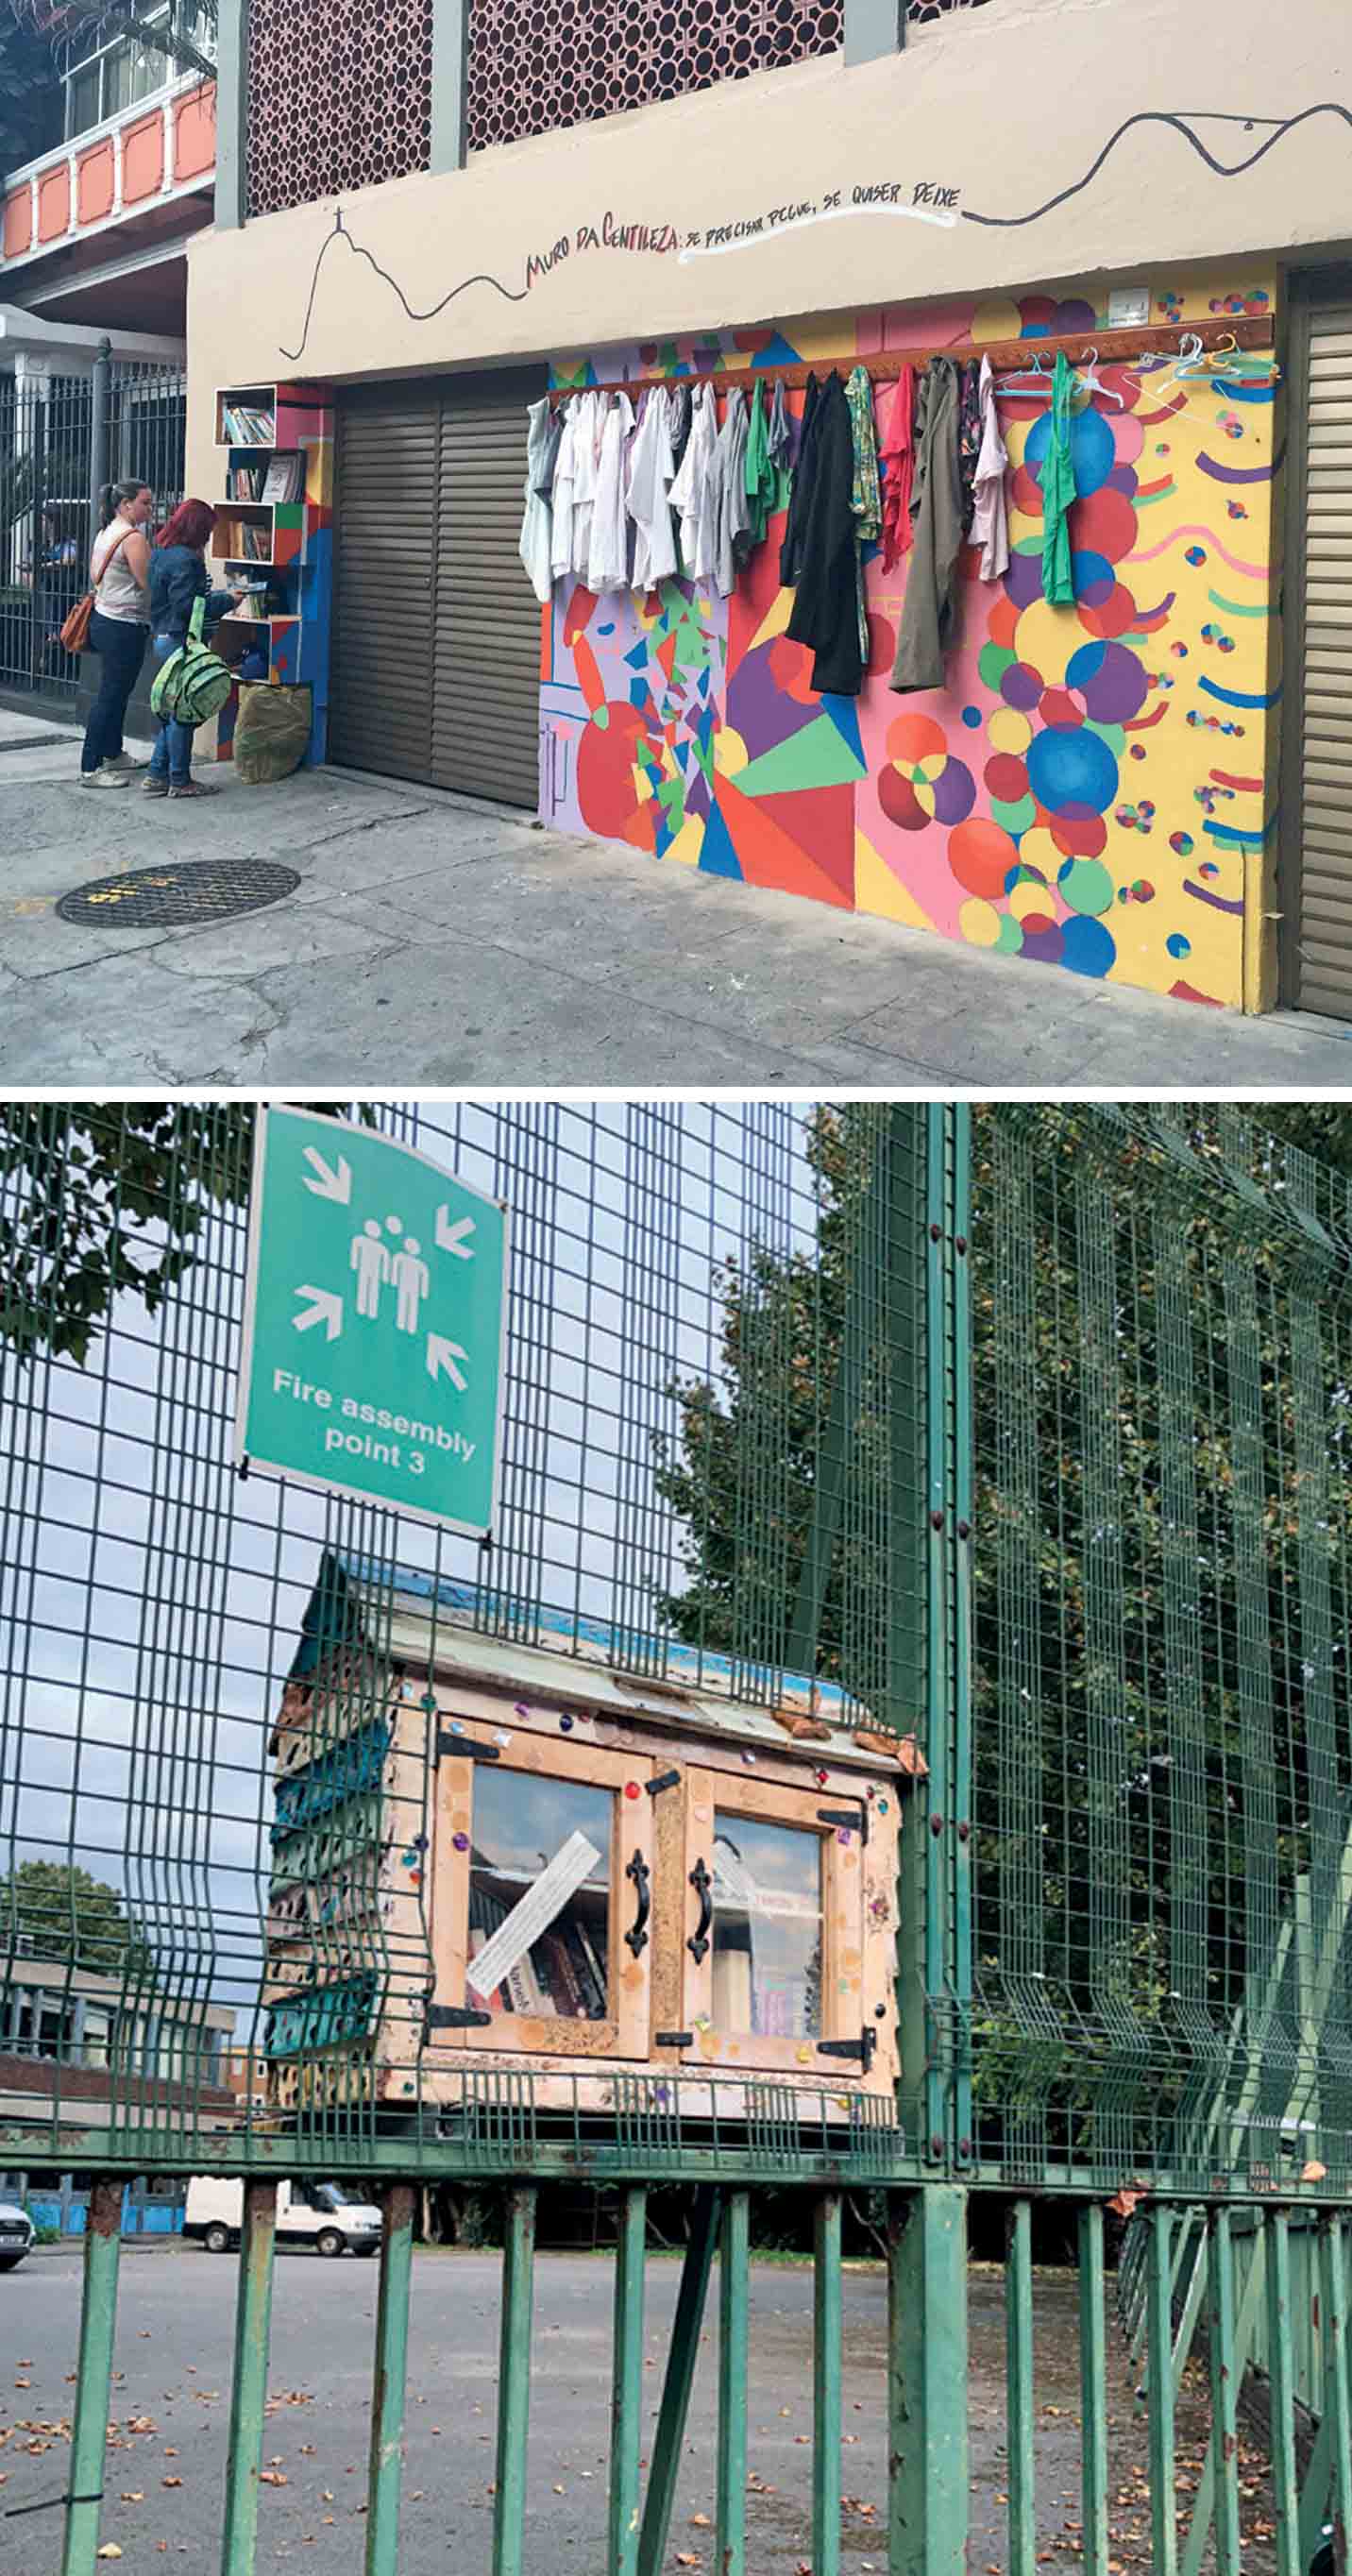 amidst-urban-edges-appropriation-transforms-them-into-places-caring-sharing-cities-wall-kindness-rio-de-janeiro-message-wall-leave-you-not-need-take-common-bookshelf-london